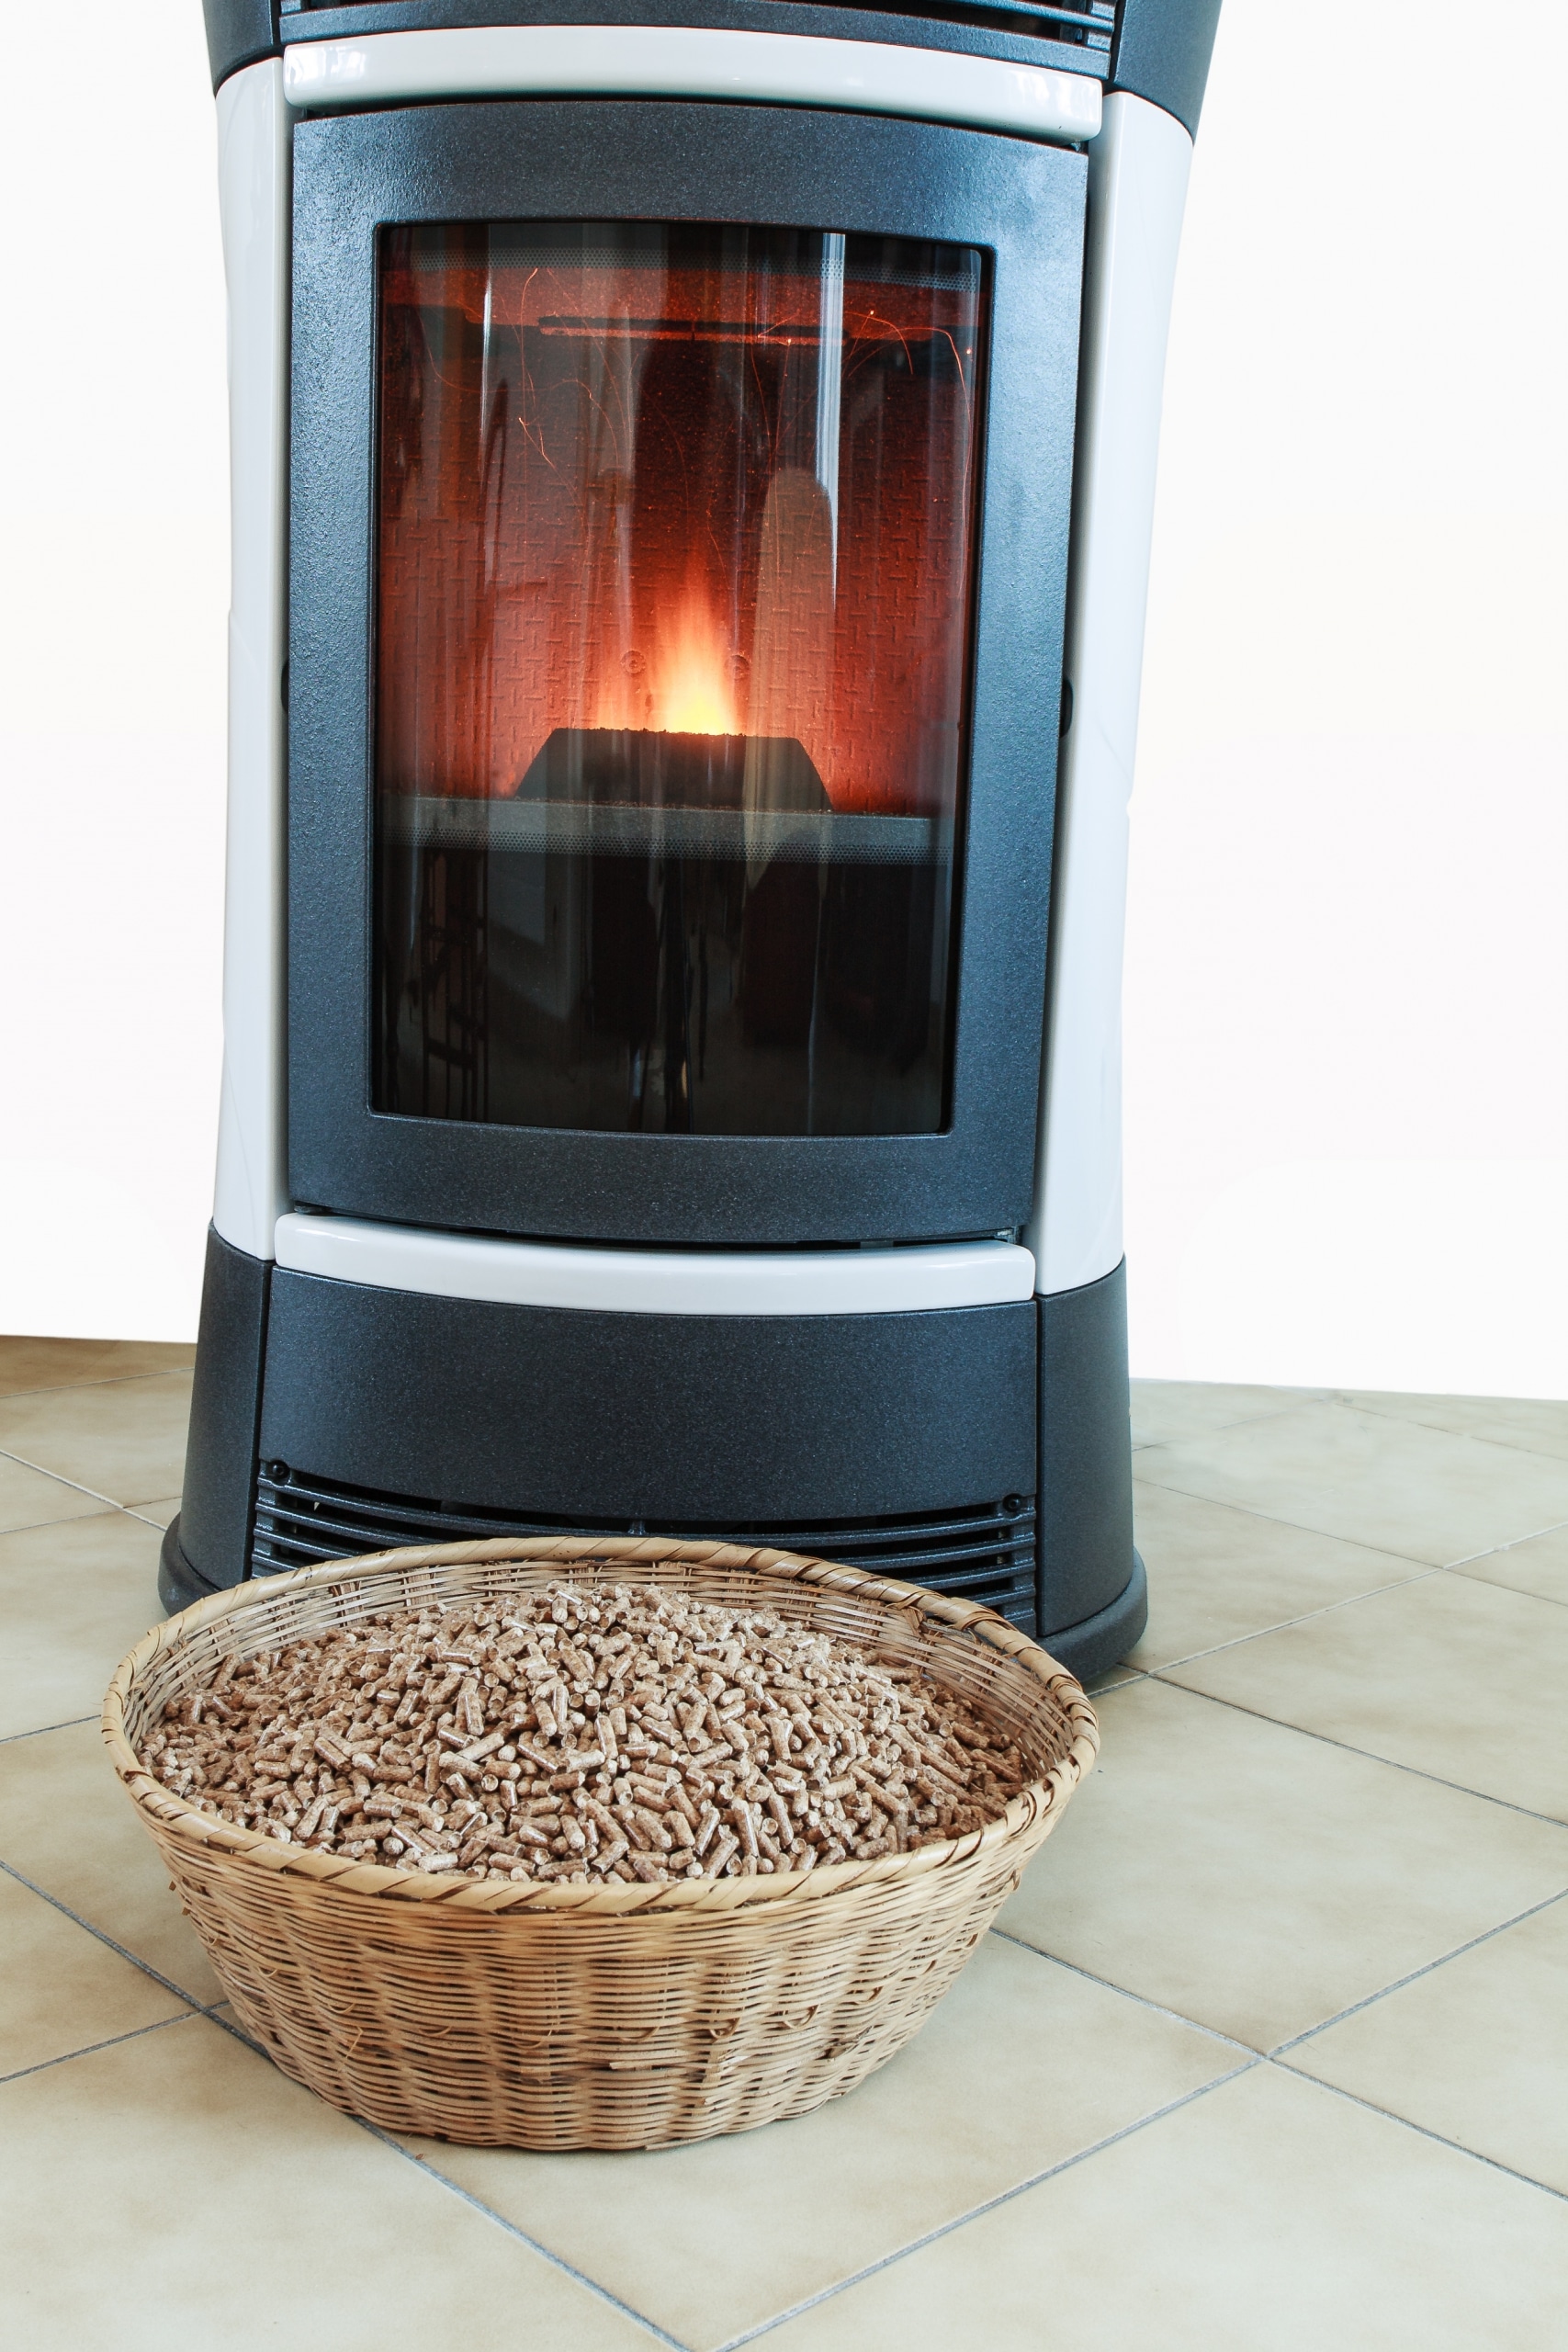 wood-pellets-prices-and-stoves-for-home-balcas-energy